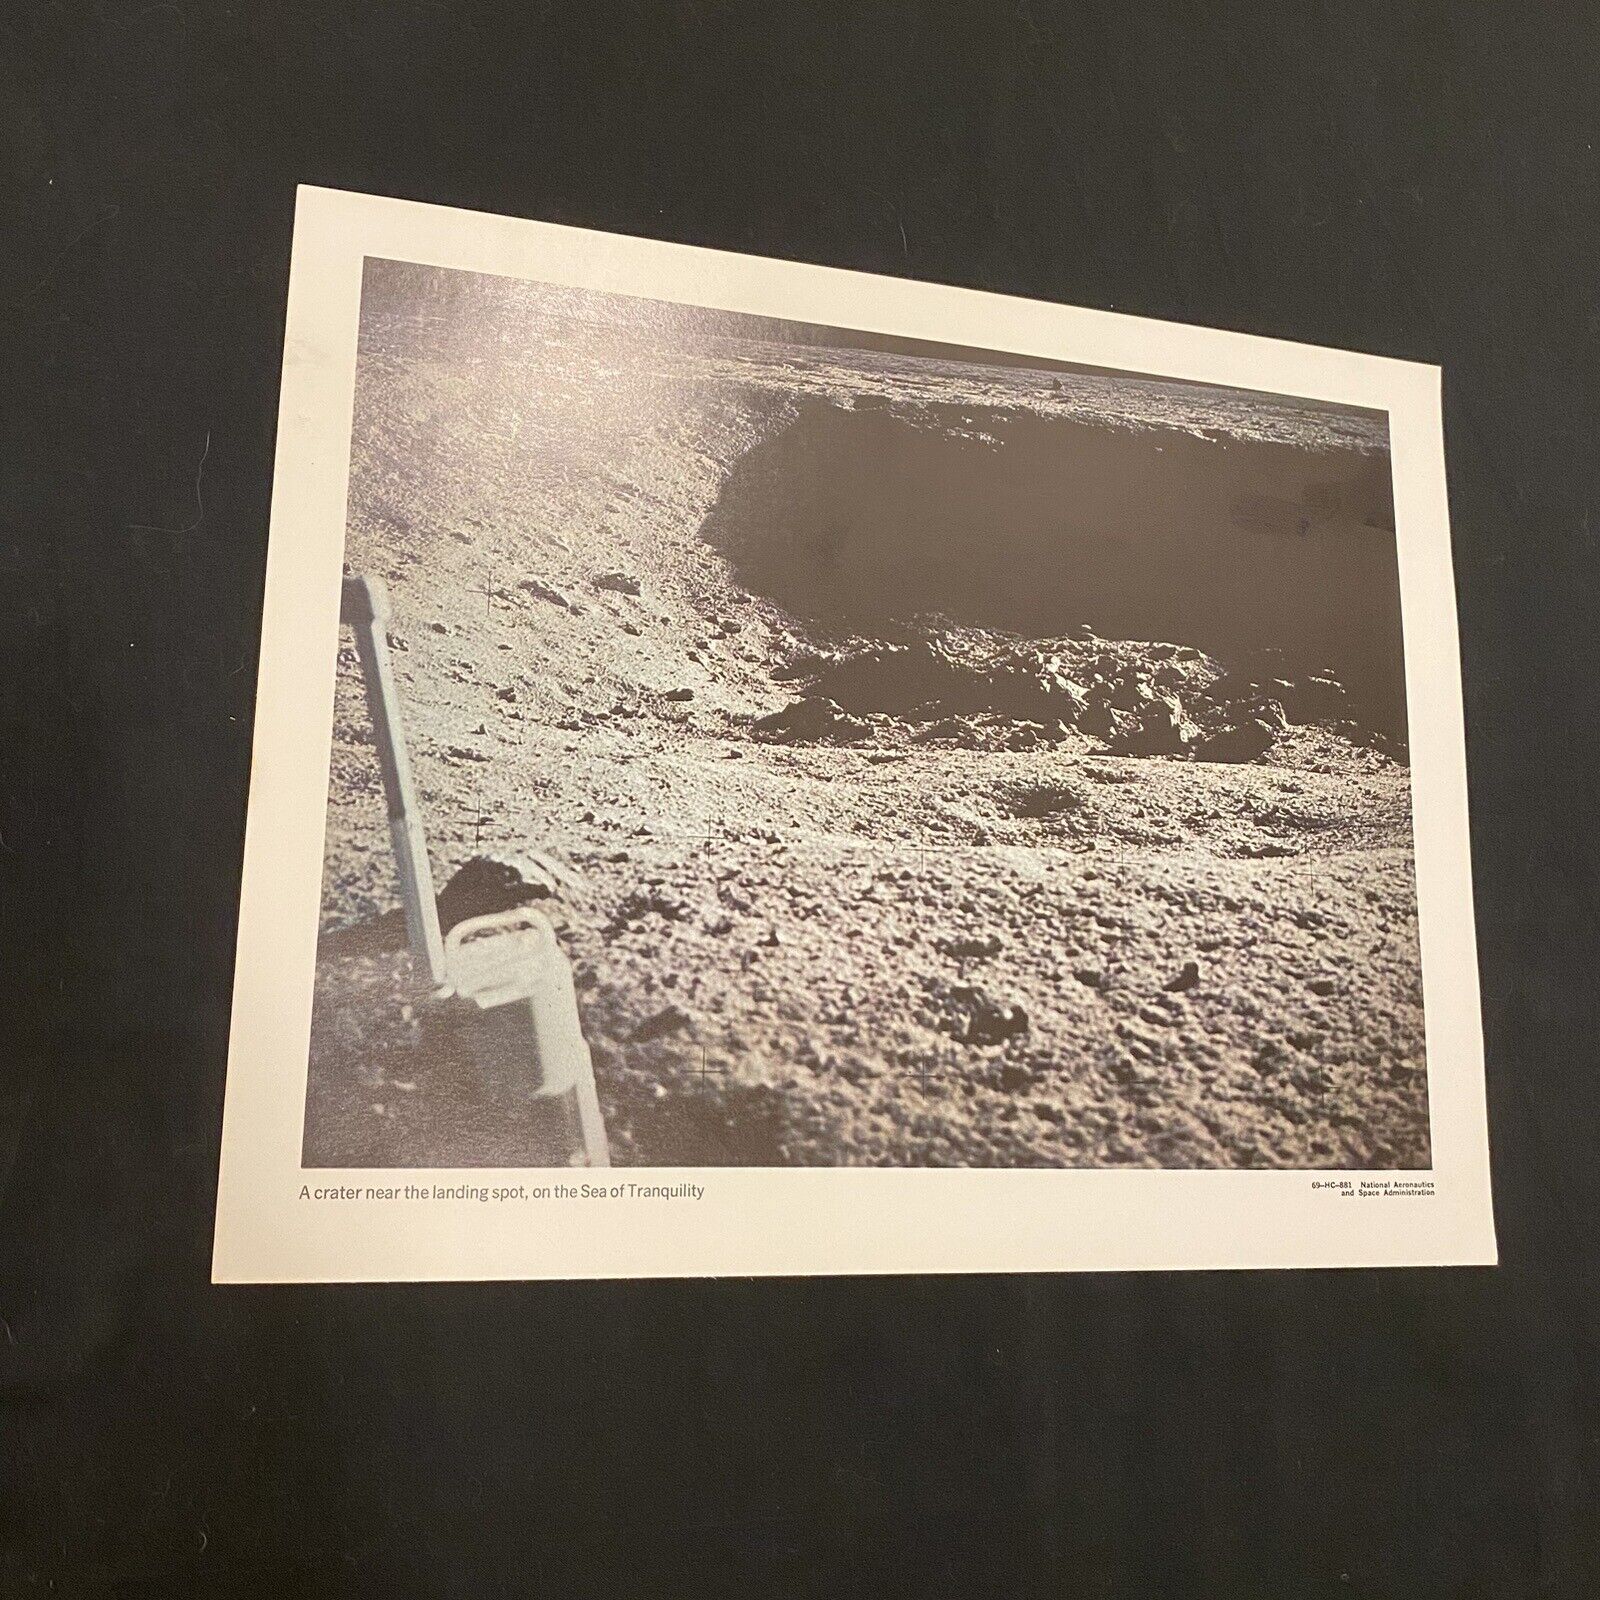 Vintage NASA Moon Photo crater near the landing spot, on the Sea of Tranquility